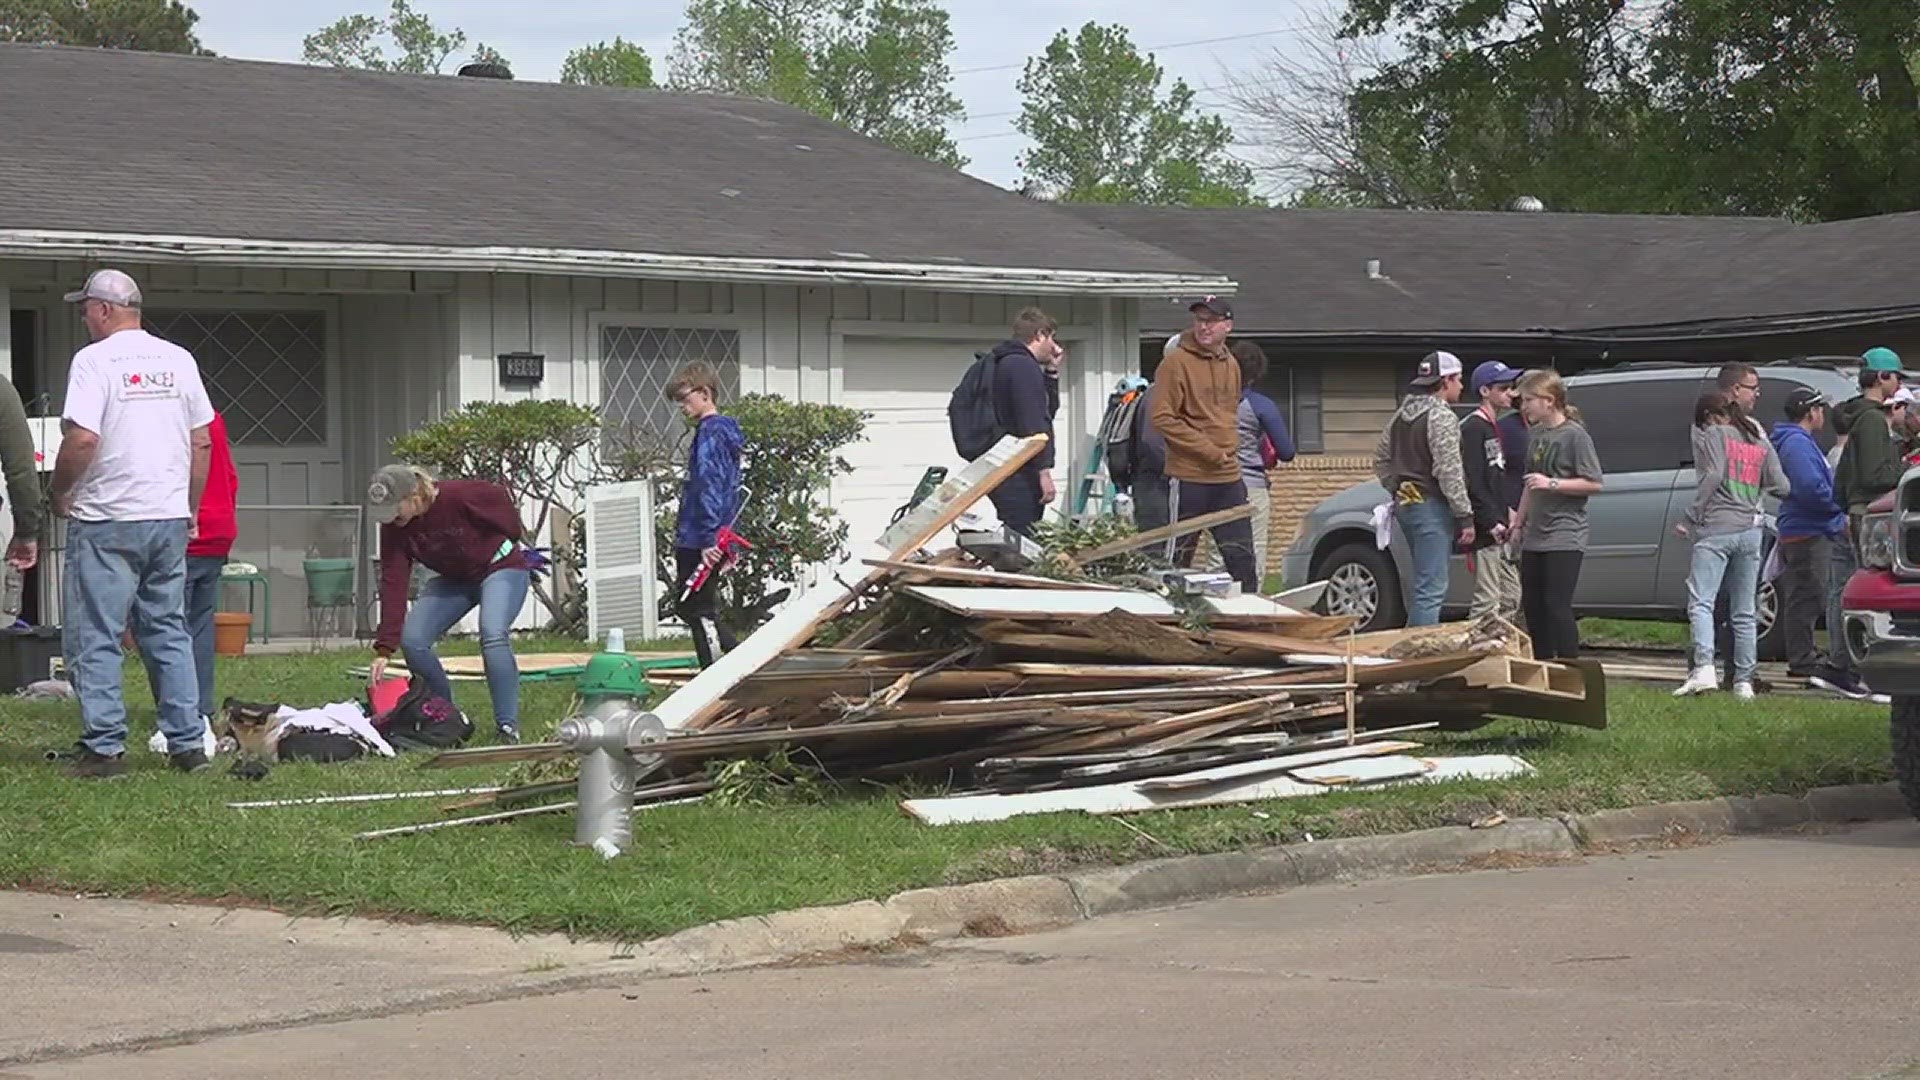 A group of Texas teenagers are going to spend their Spring Break giving back to the community and helping those in need.